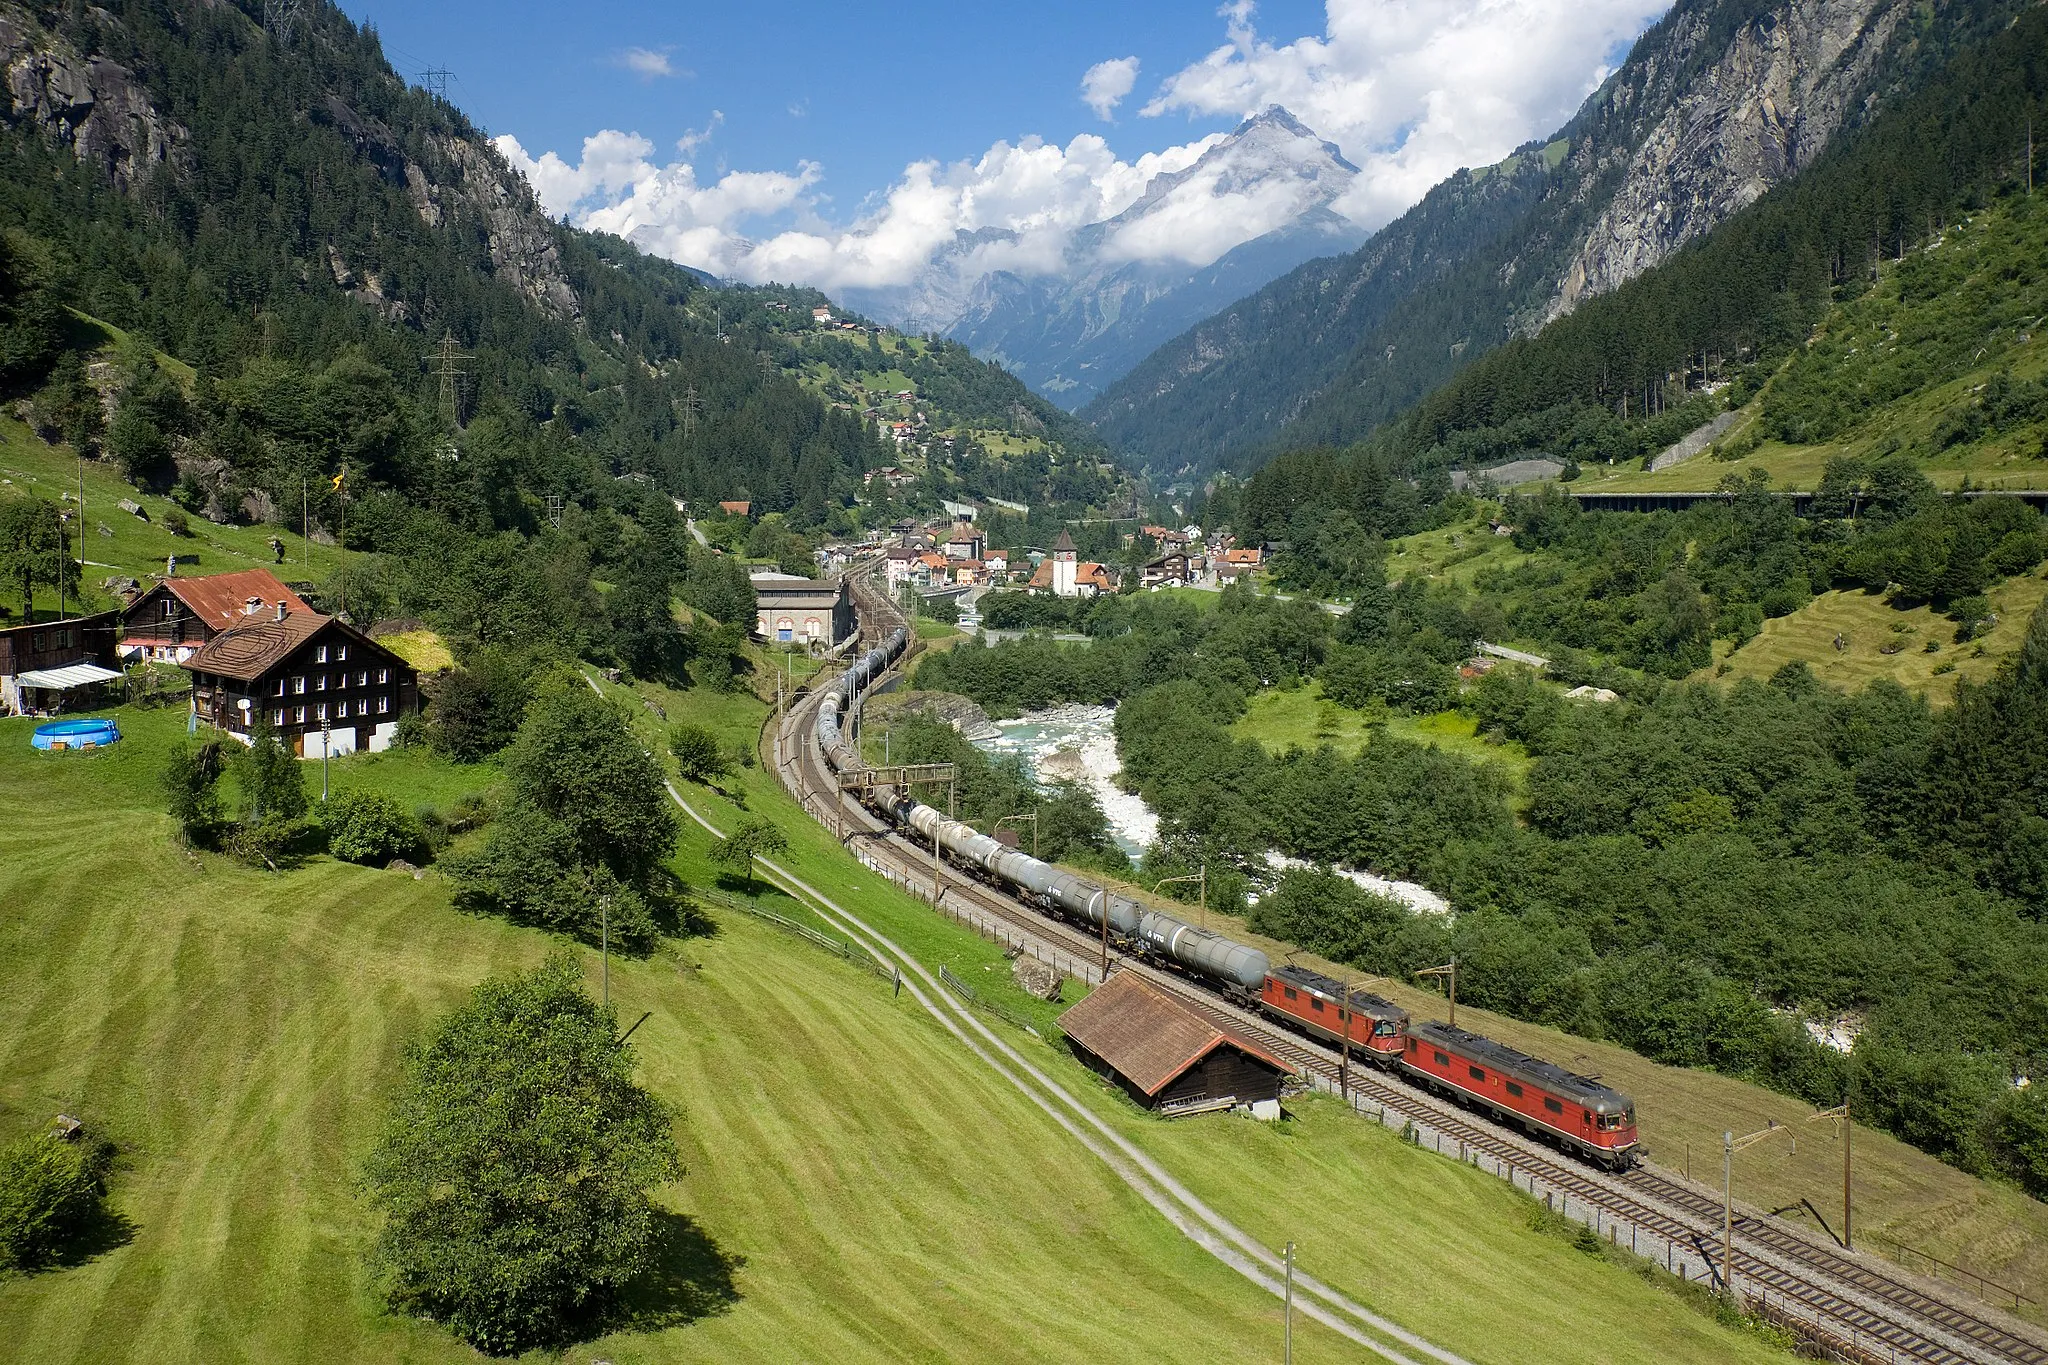 Photo showing: A SBB-CFF-FFS Re 6/6 and Re 4/4 II at the front plus another Re 4/4 II pushing at the rear (barely visible) haul a 1500 ton oil train uphill on the Gotthard line. Picture taken near Gurtnellen, Switzerland.